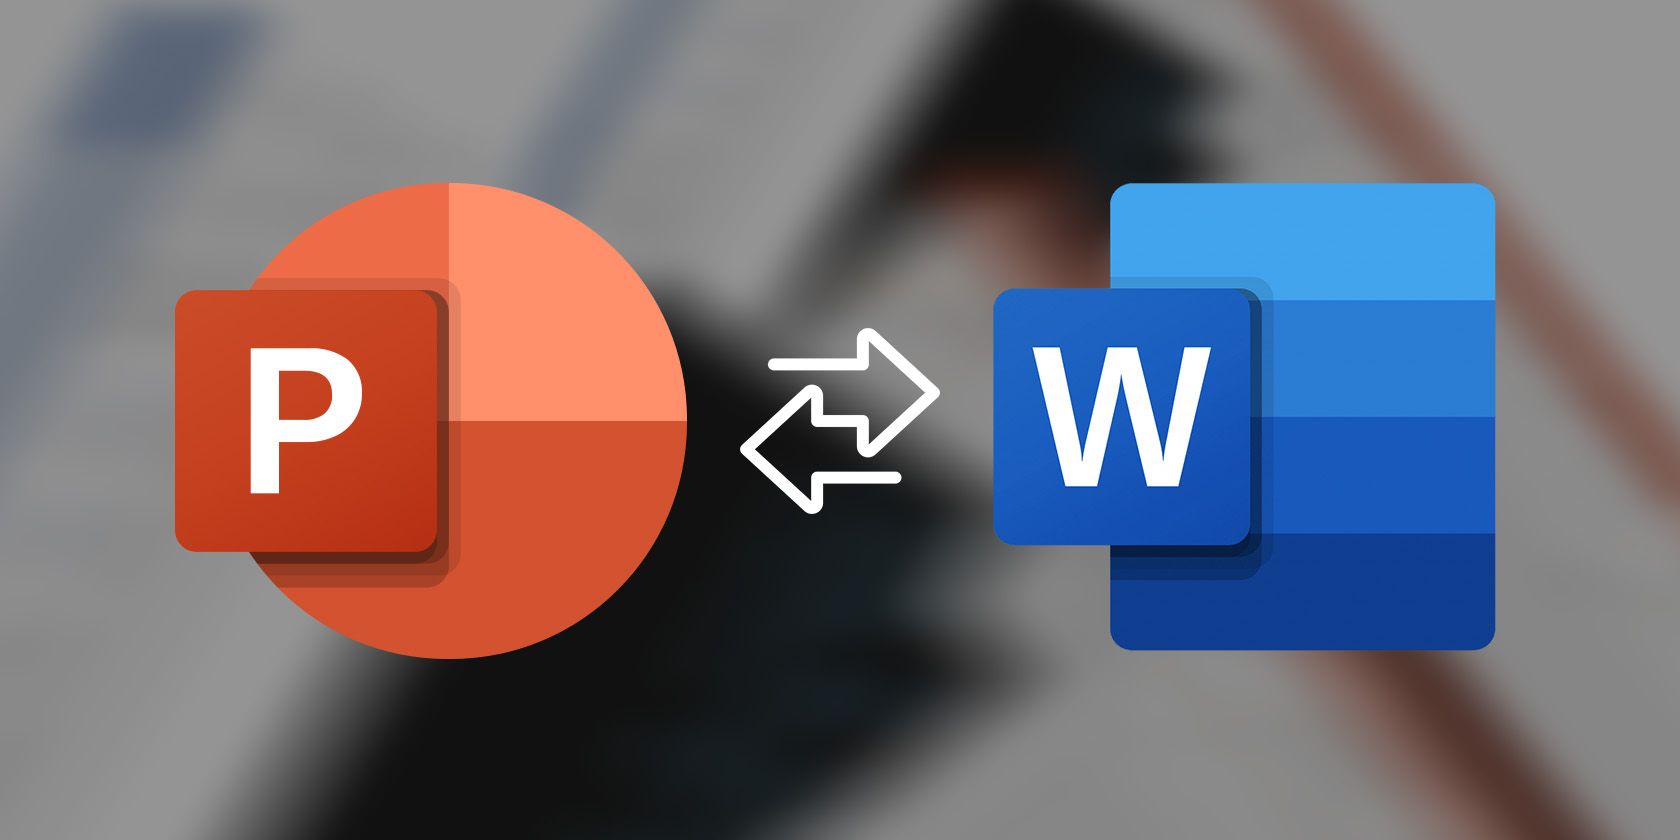 Word and PowerPoint logos on a background